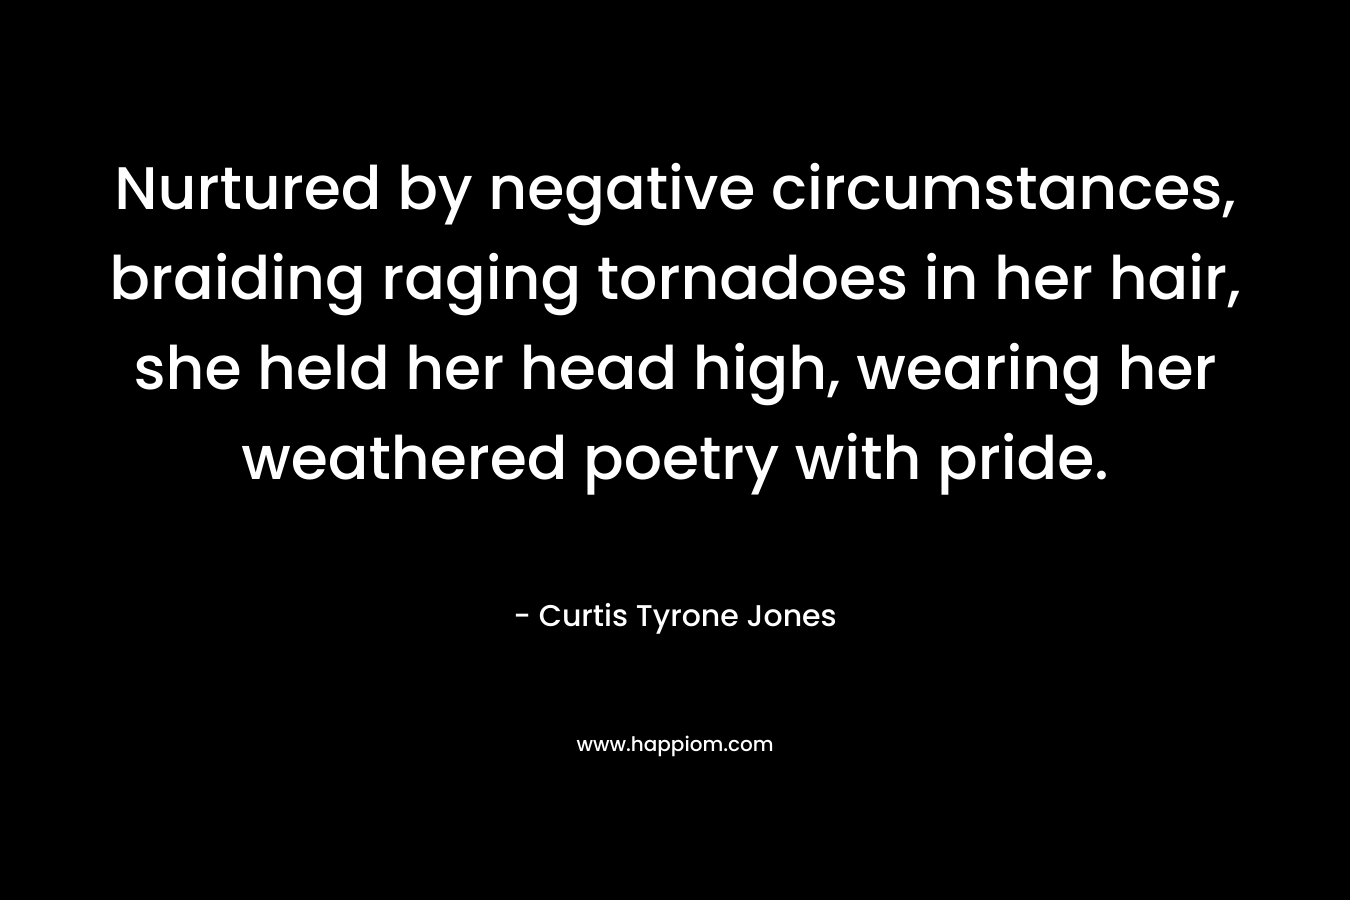 Nurtured by negative circumstances, braiding raging tornadoes in her hair, she held her head high, wearing her weathered poetry with pride.